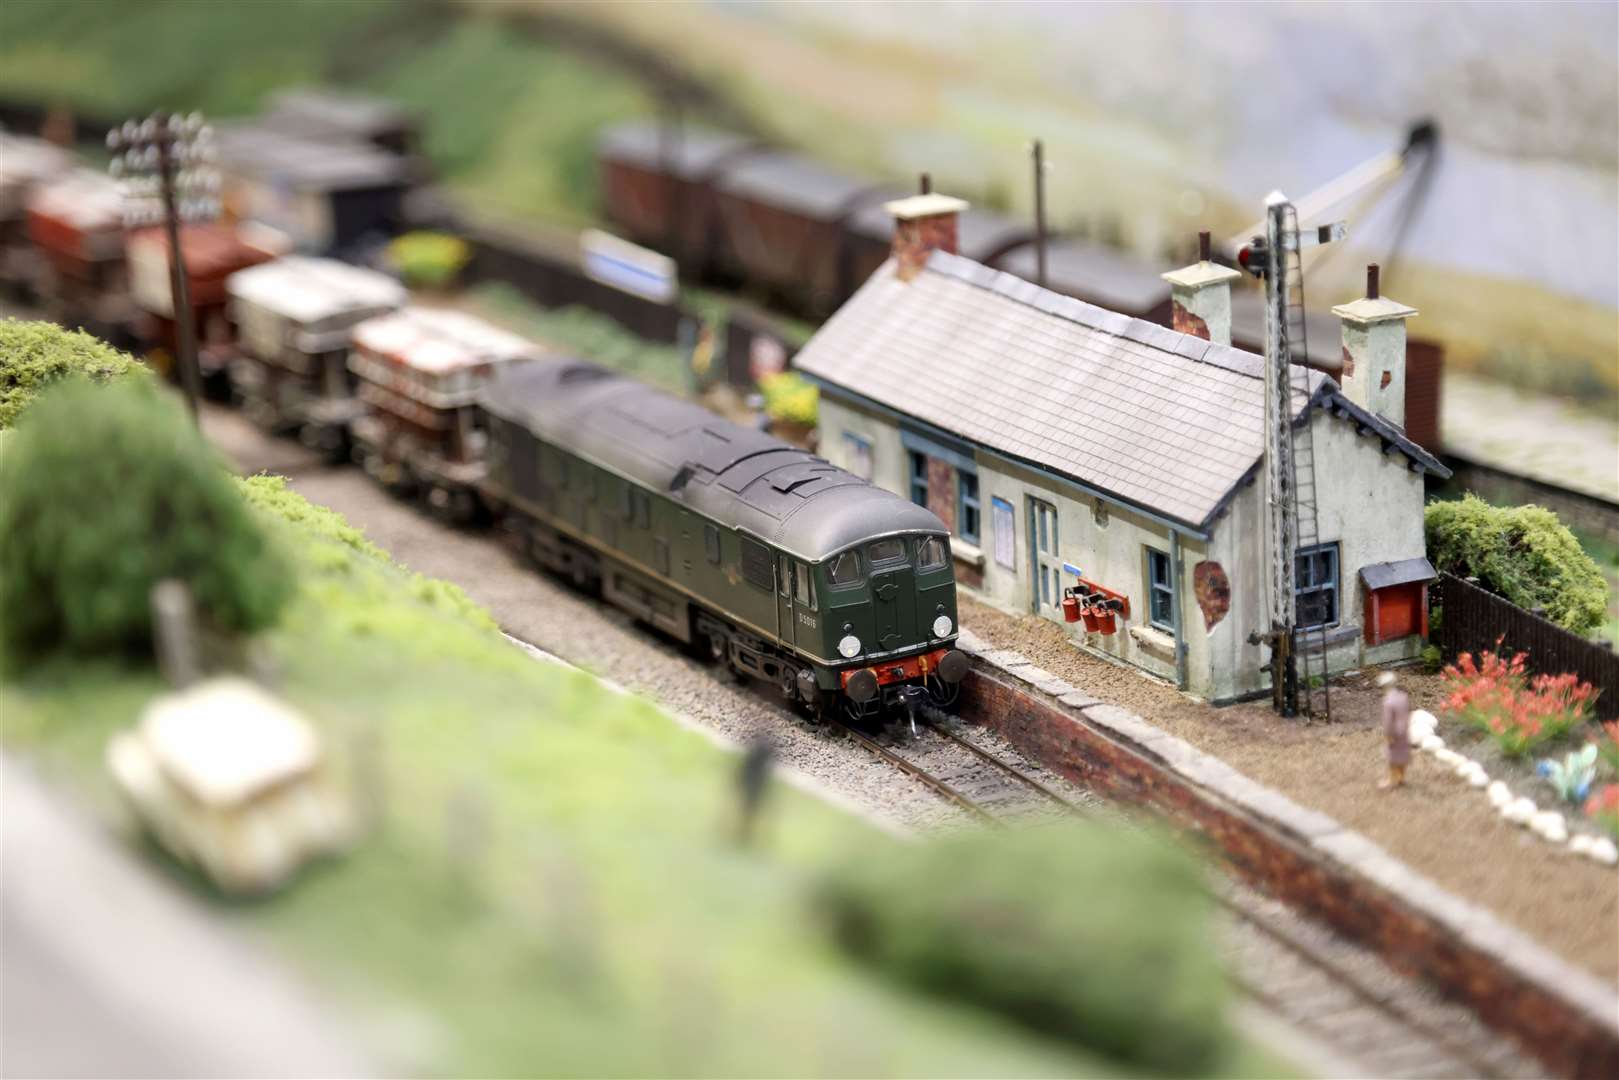 A model railway day is taking place